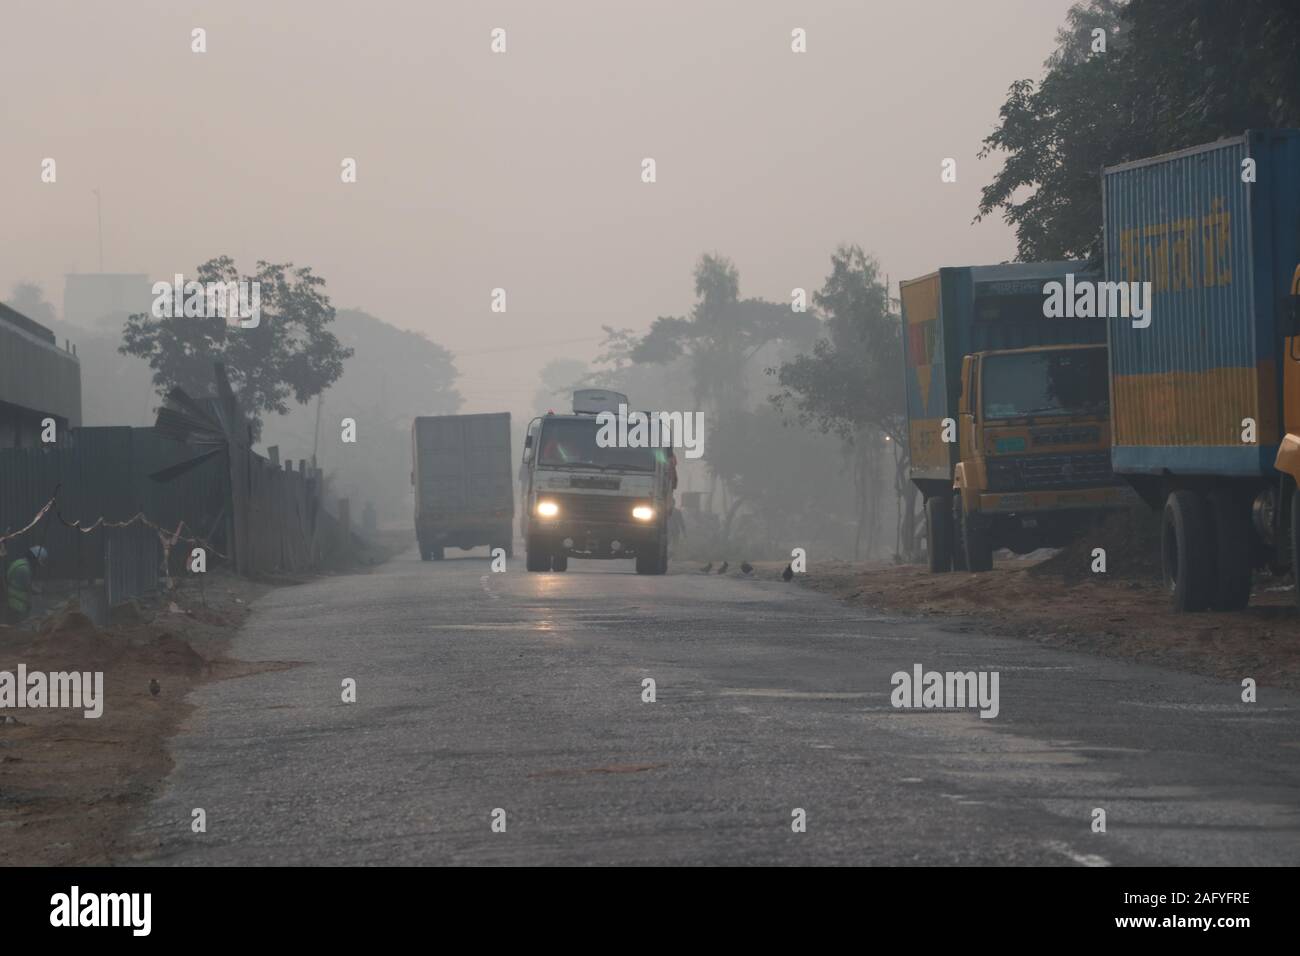 Winter fog  22nov2019.dhaka sylhet highway road.Drivers are driving with headlights on in winter fog.Nazmul Islam/ alamy stock live news Stock Photo